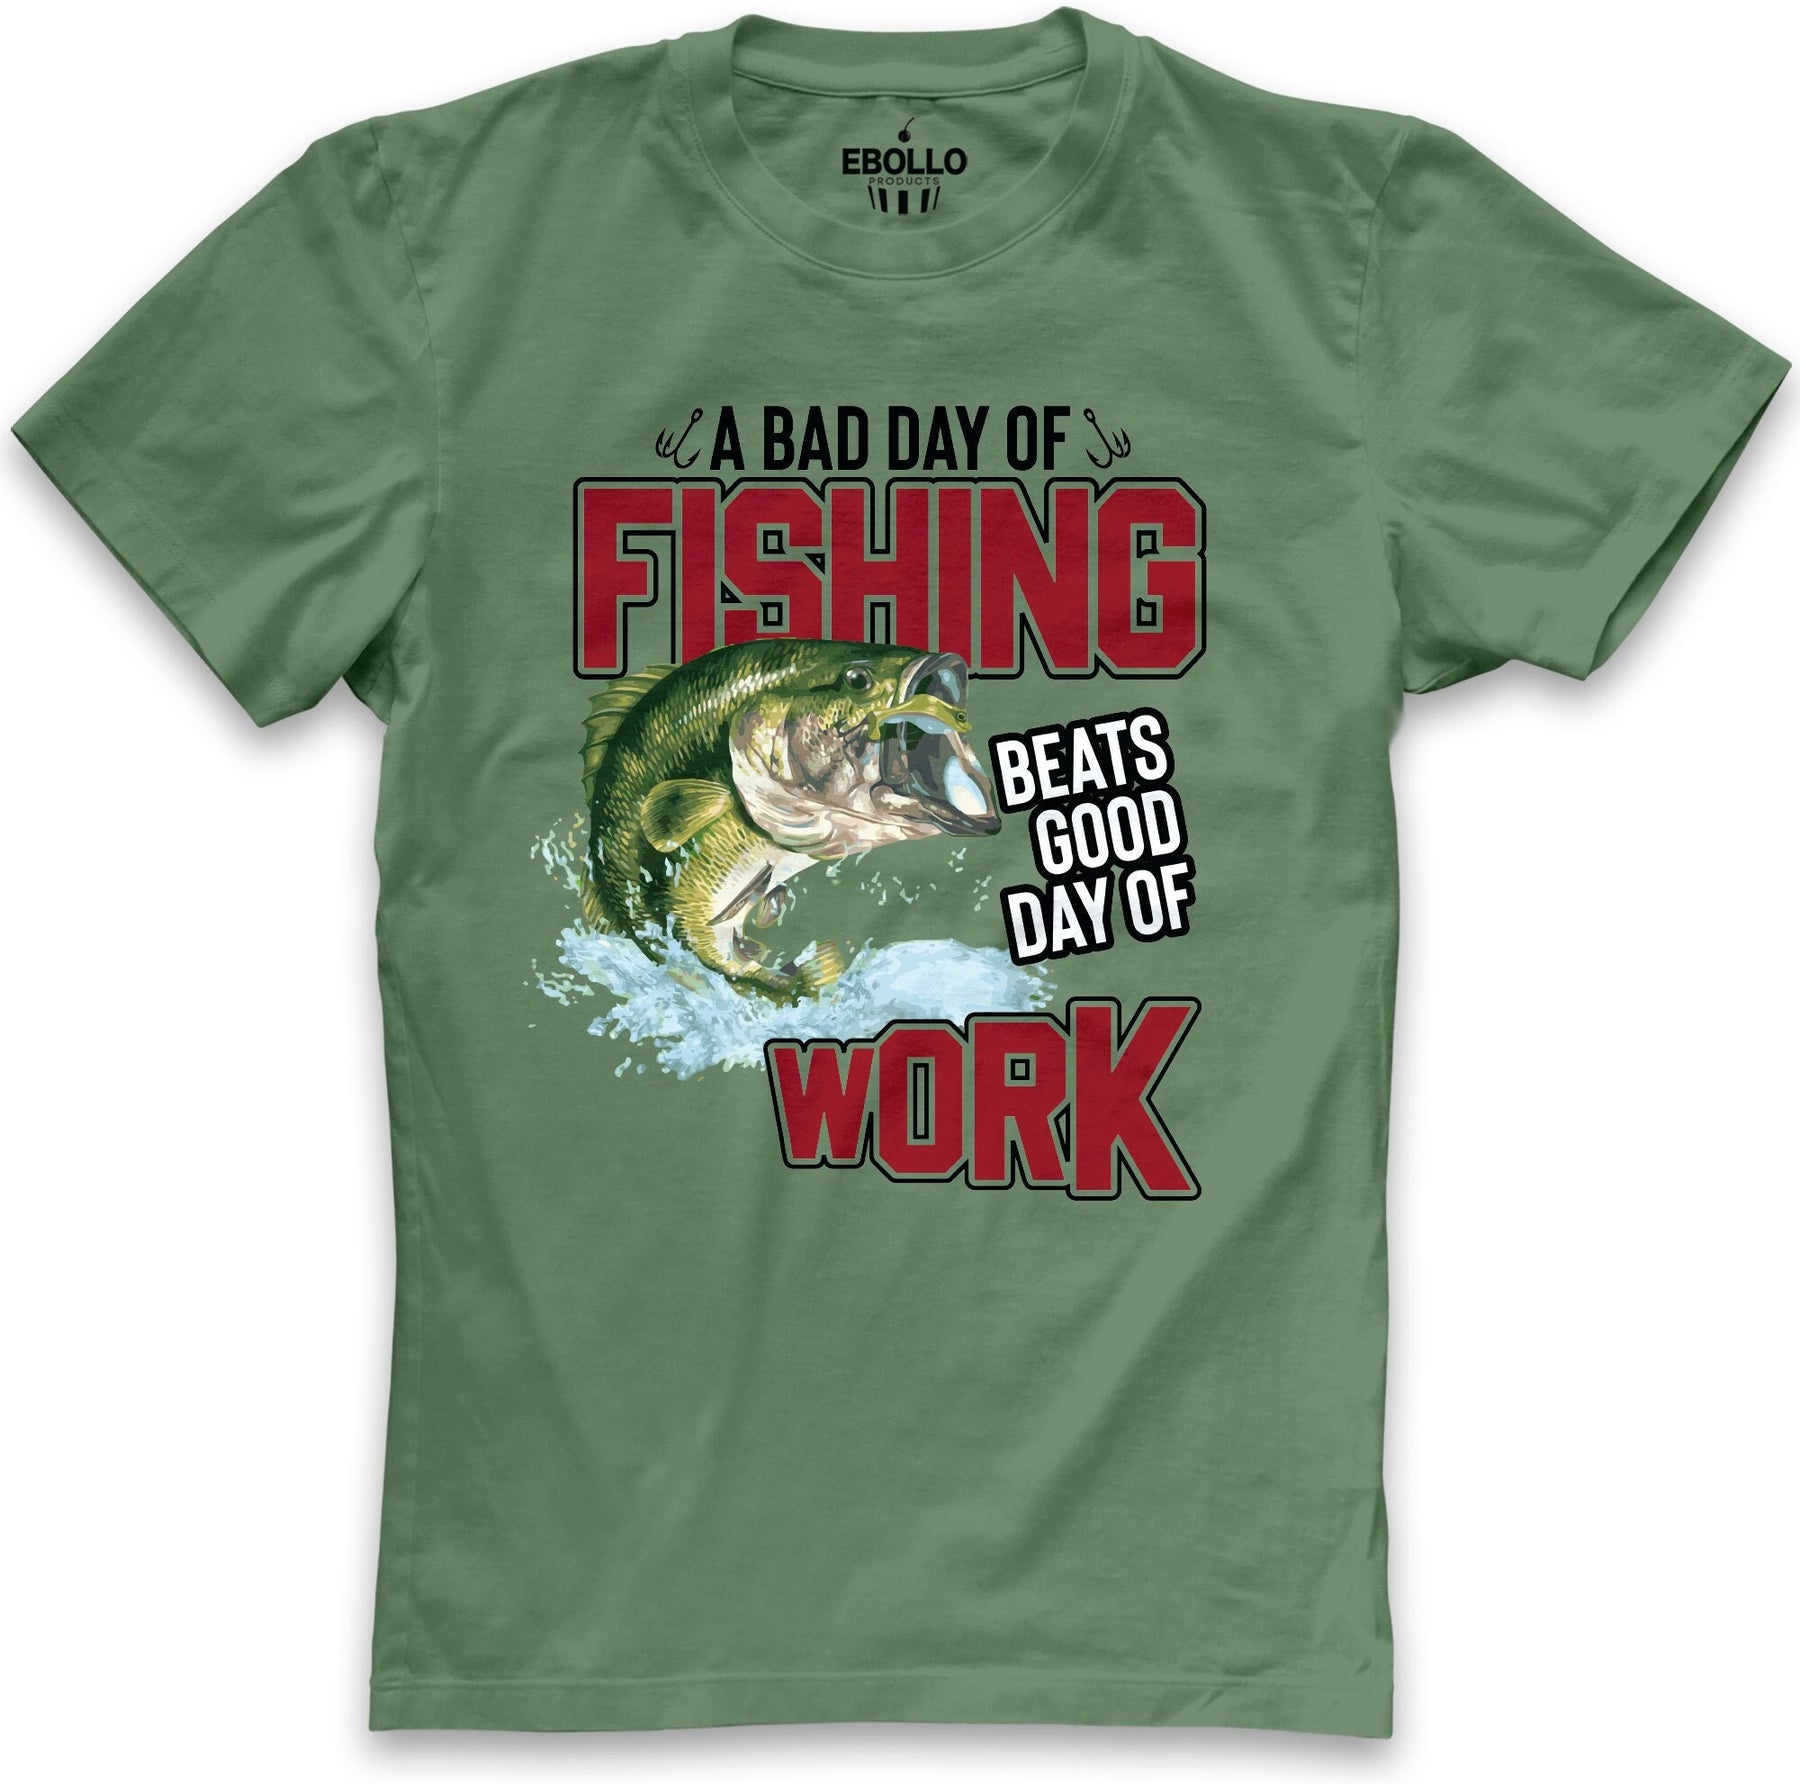 Fishing Gifts for Men, Fishing Gifts, Funny Fishing Gifts for Boys, Fishing  Gifts for Women Unique,Fishing Gift, Best Gifts for Fisherman, Gifts for